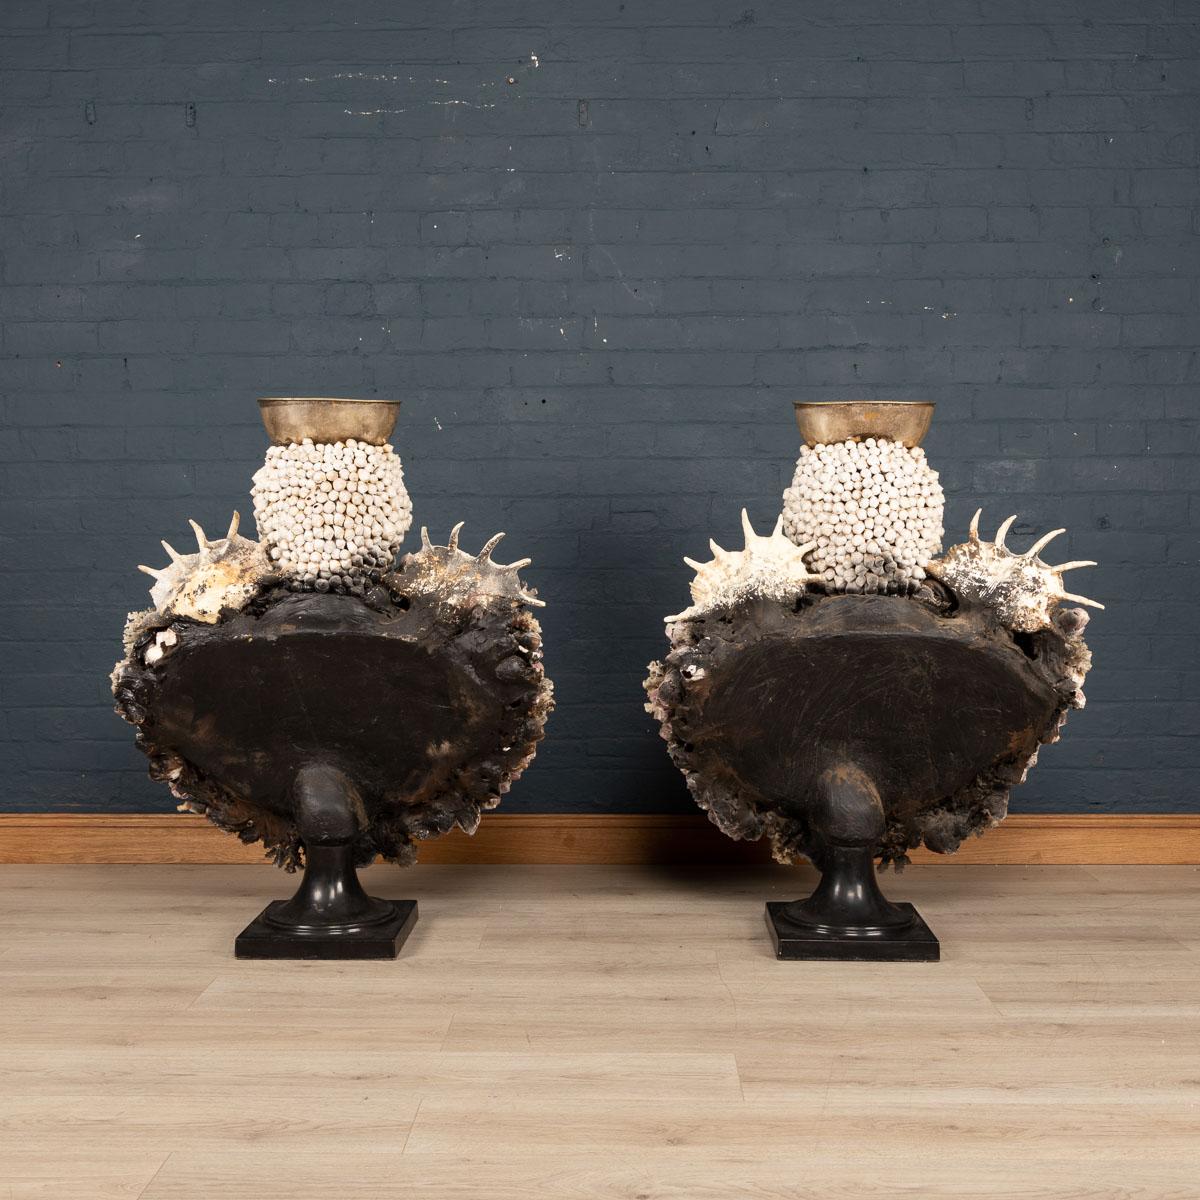 English Pair of Large 20th Century Planters by Anthony Redmile, London, circa 1970